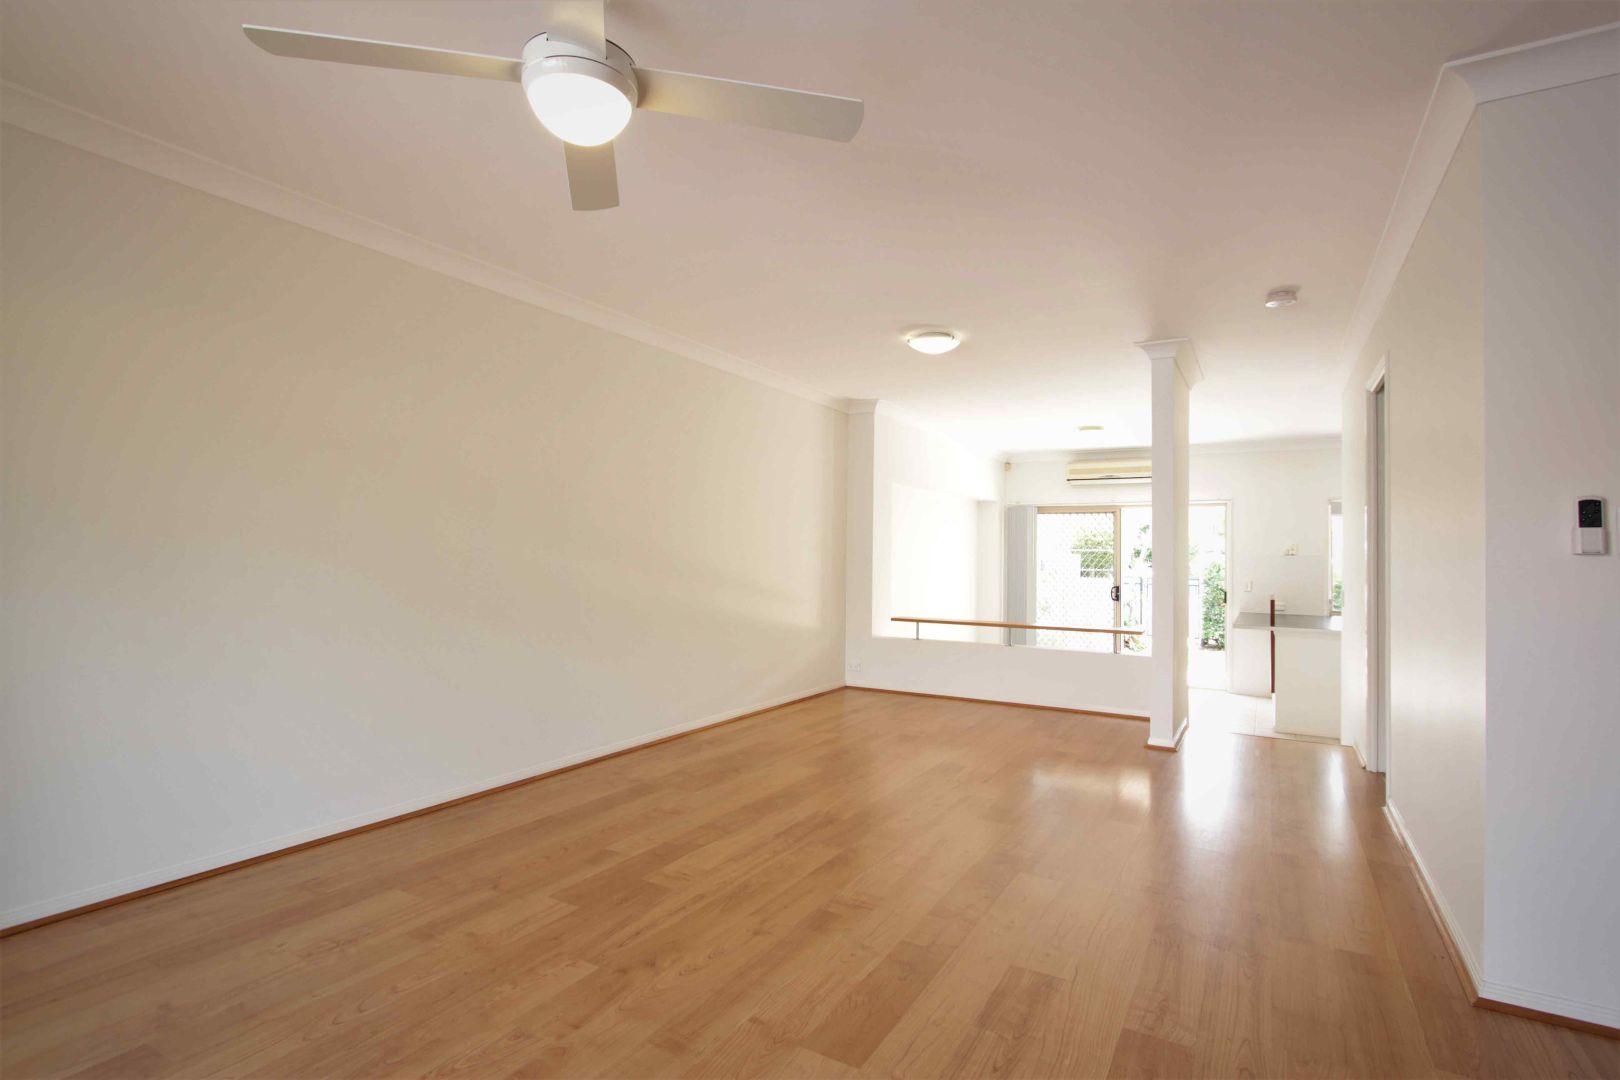 7/101 Coutts Street, Bulimba QLD 4171, Image 2